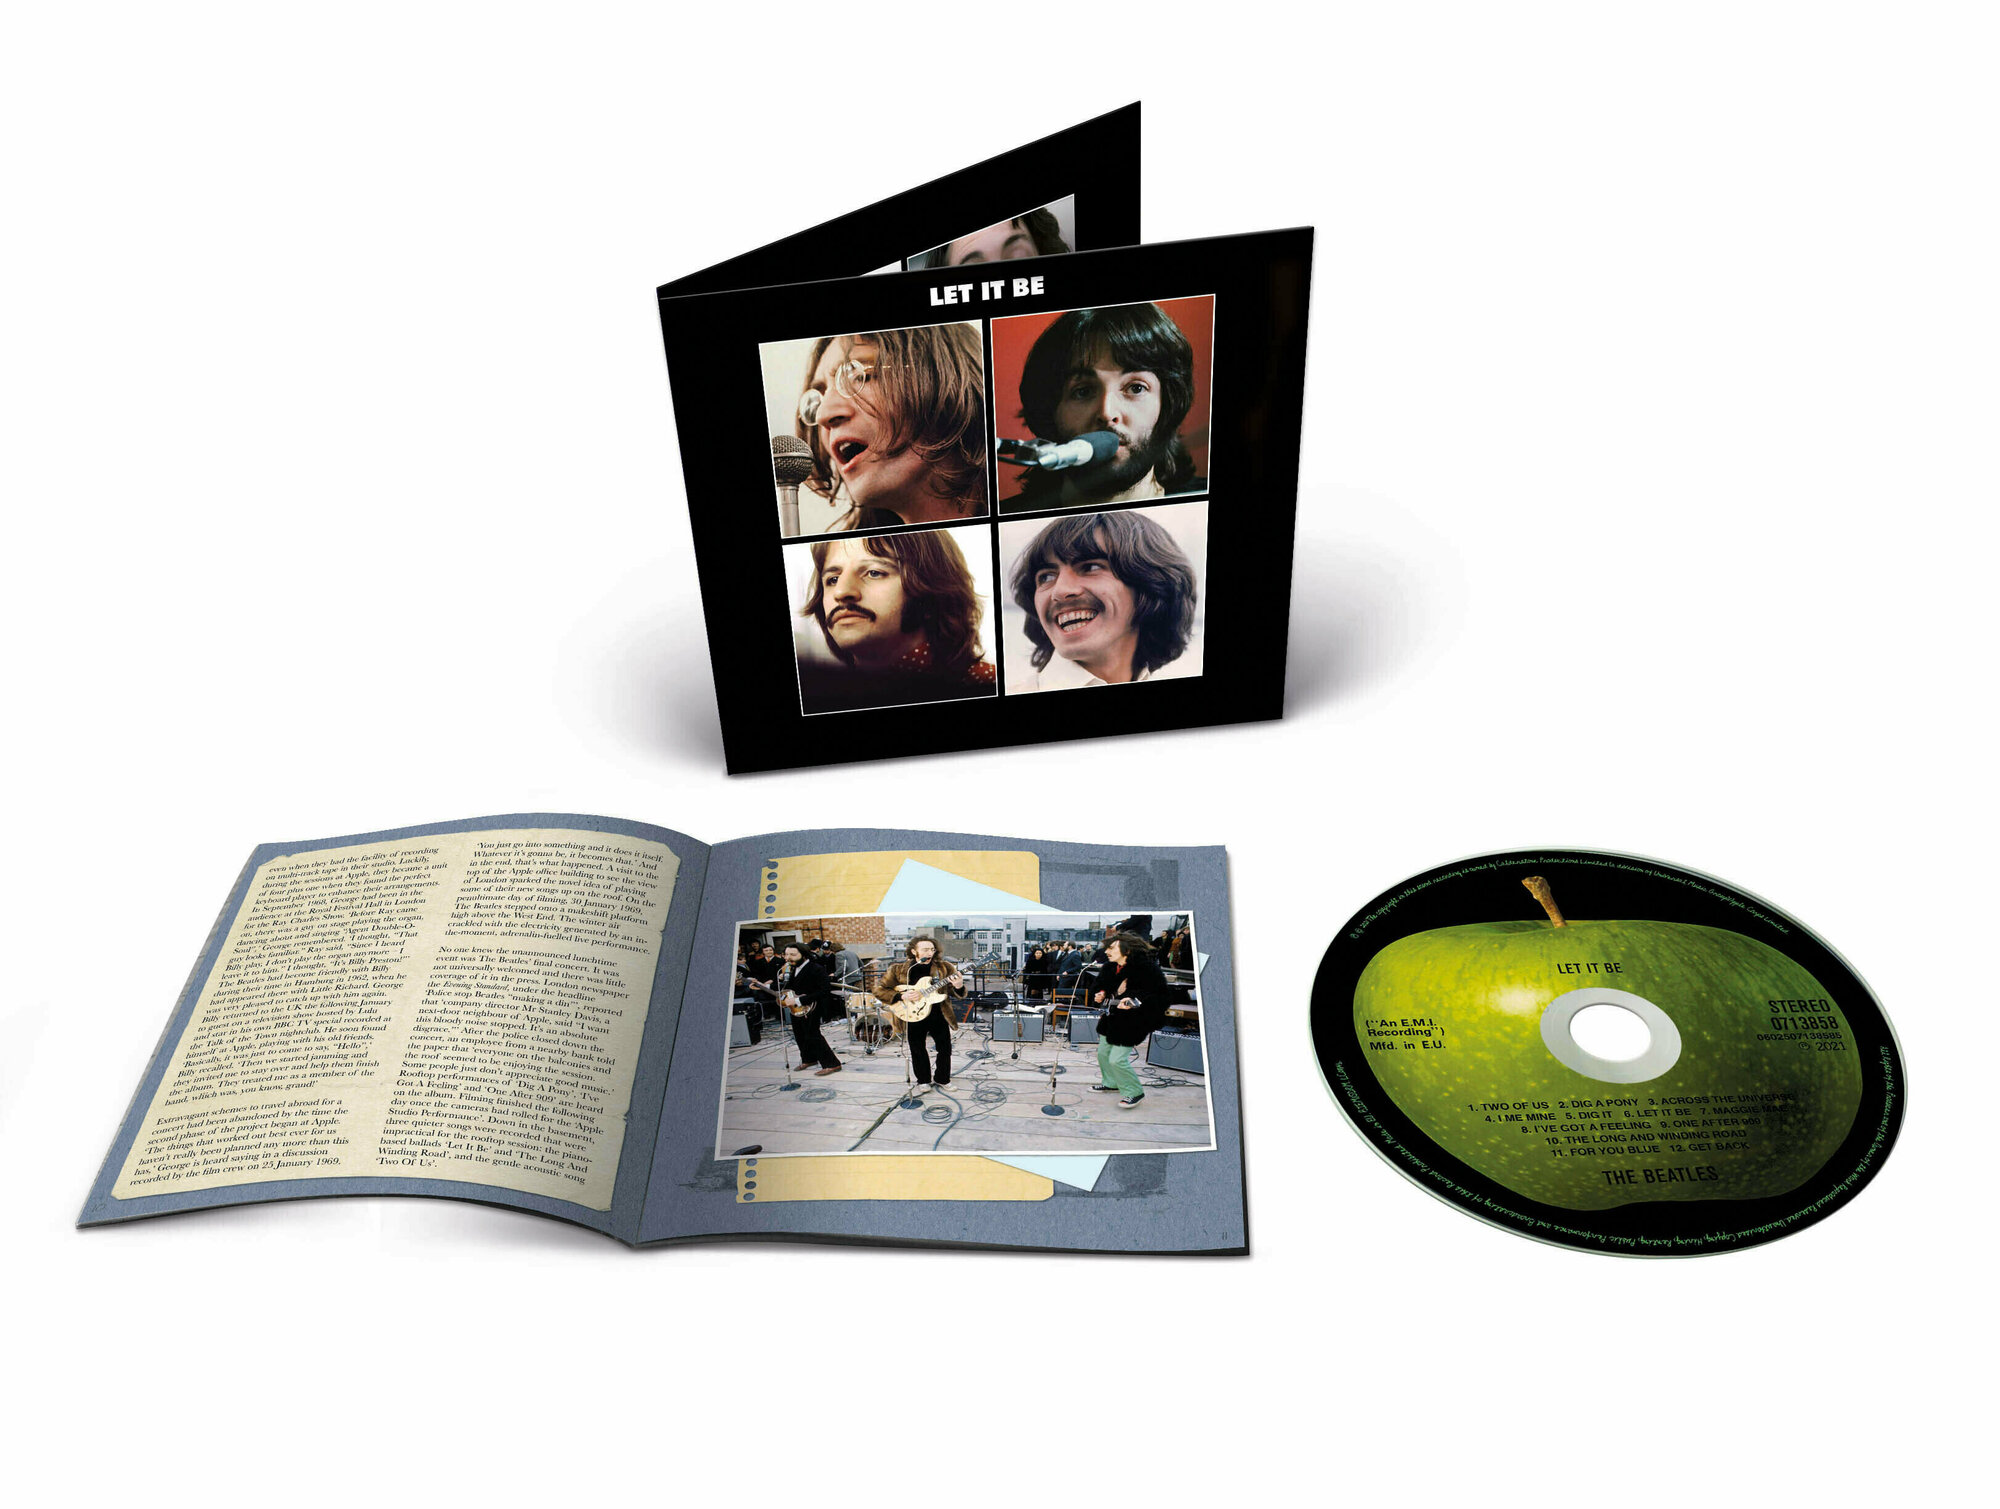 AUDIO CD The Beatles - Let It Be (Special Edition) 1 CD